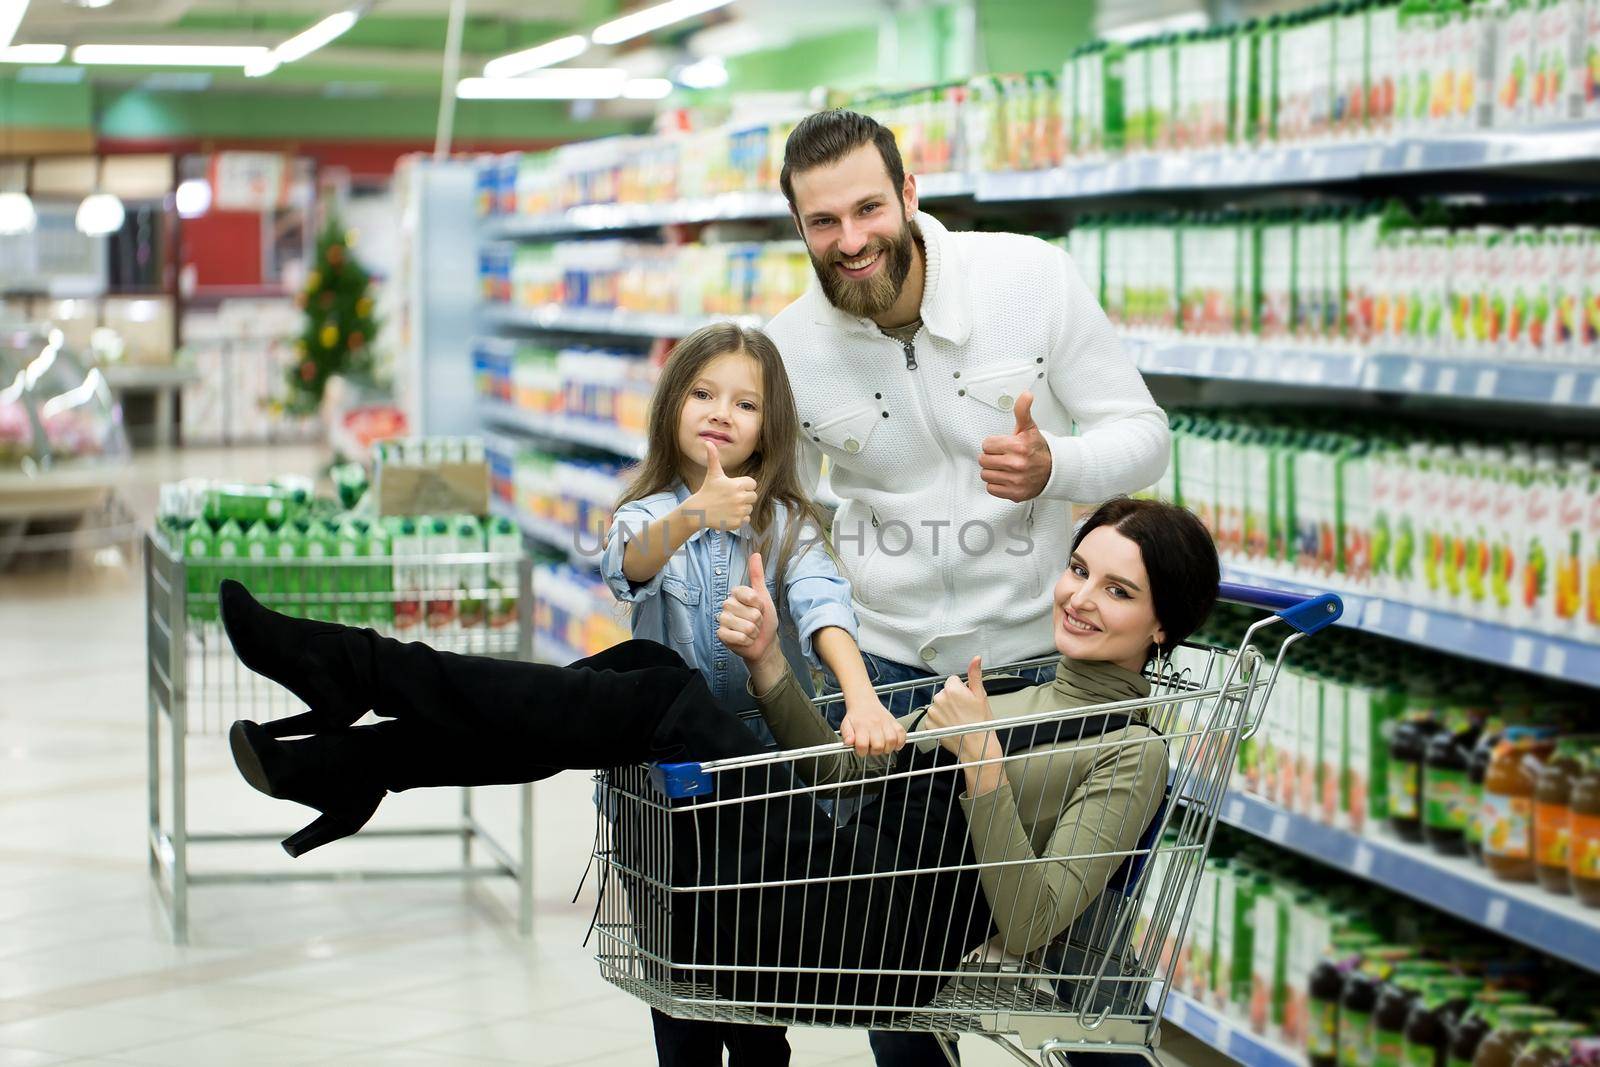 Beautiful young parents and their cute little daughter are smiling while choosing food in the supermarket. Father pushes the shopping cart while the girls sit there